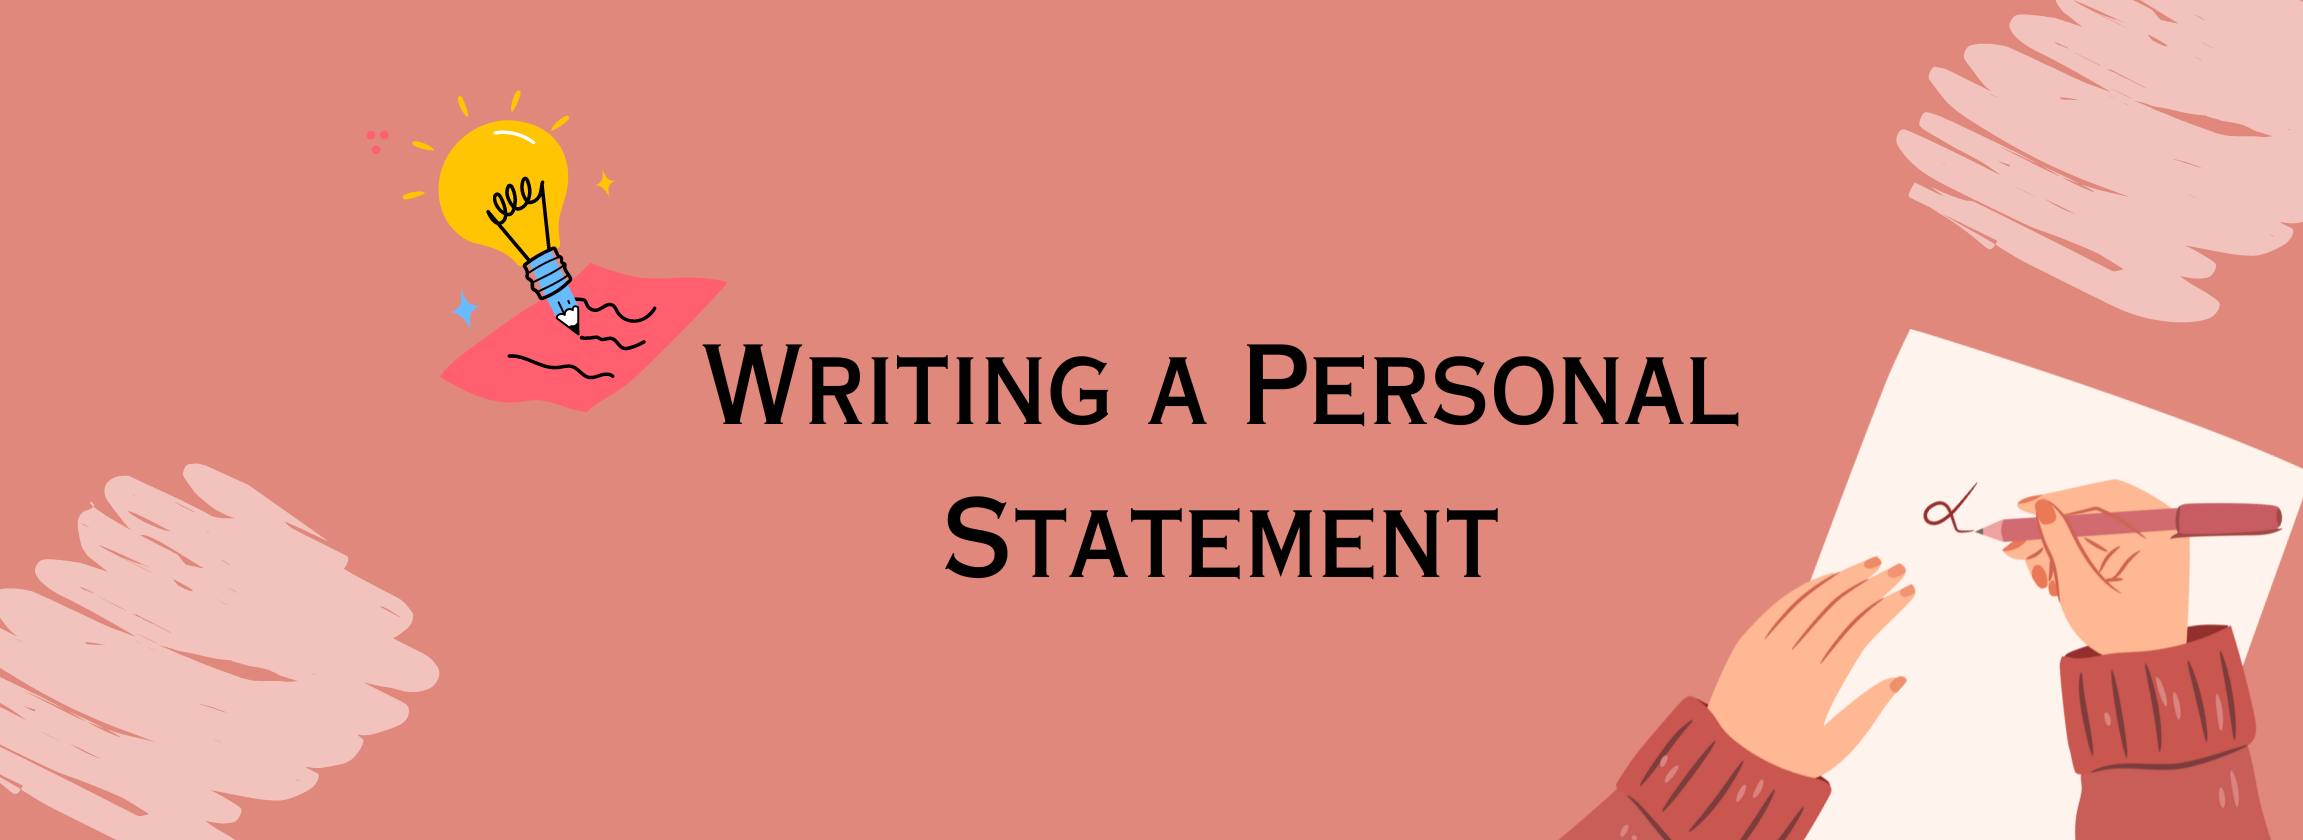 how to write personal statement for job examples